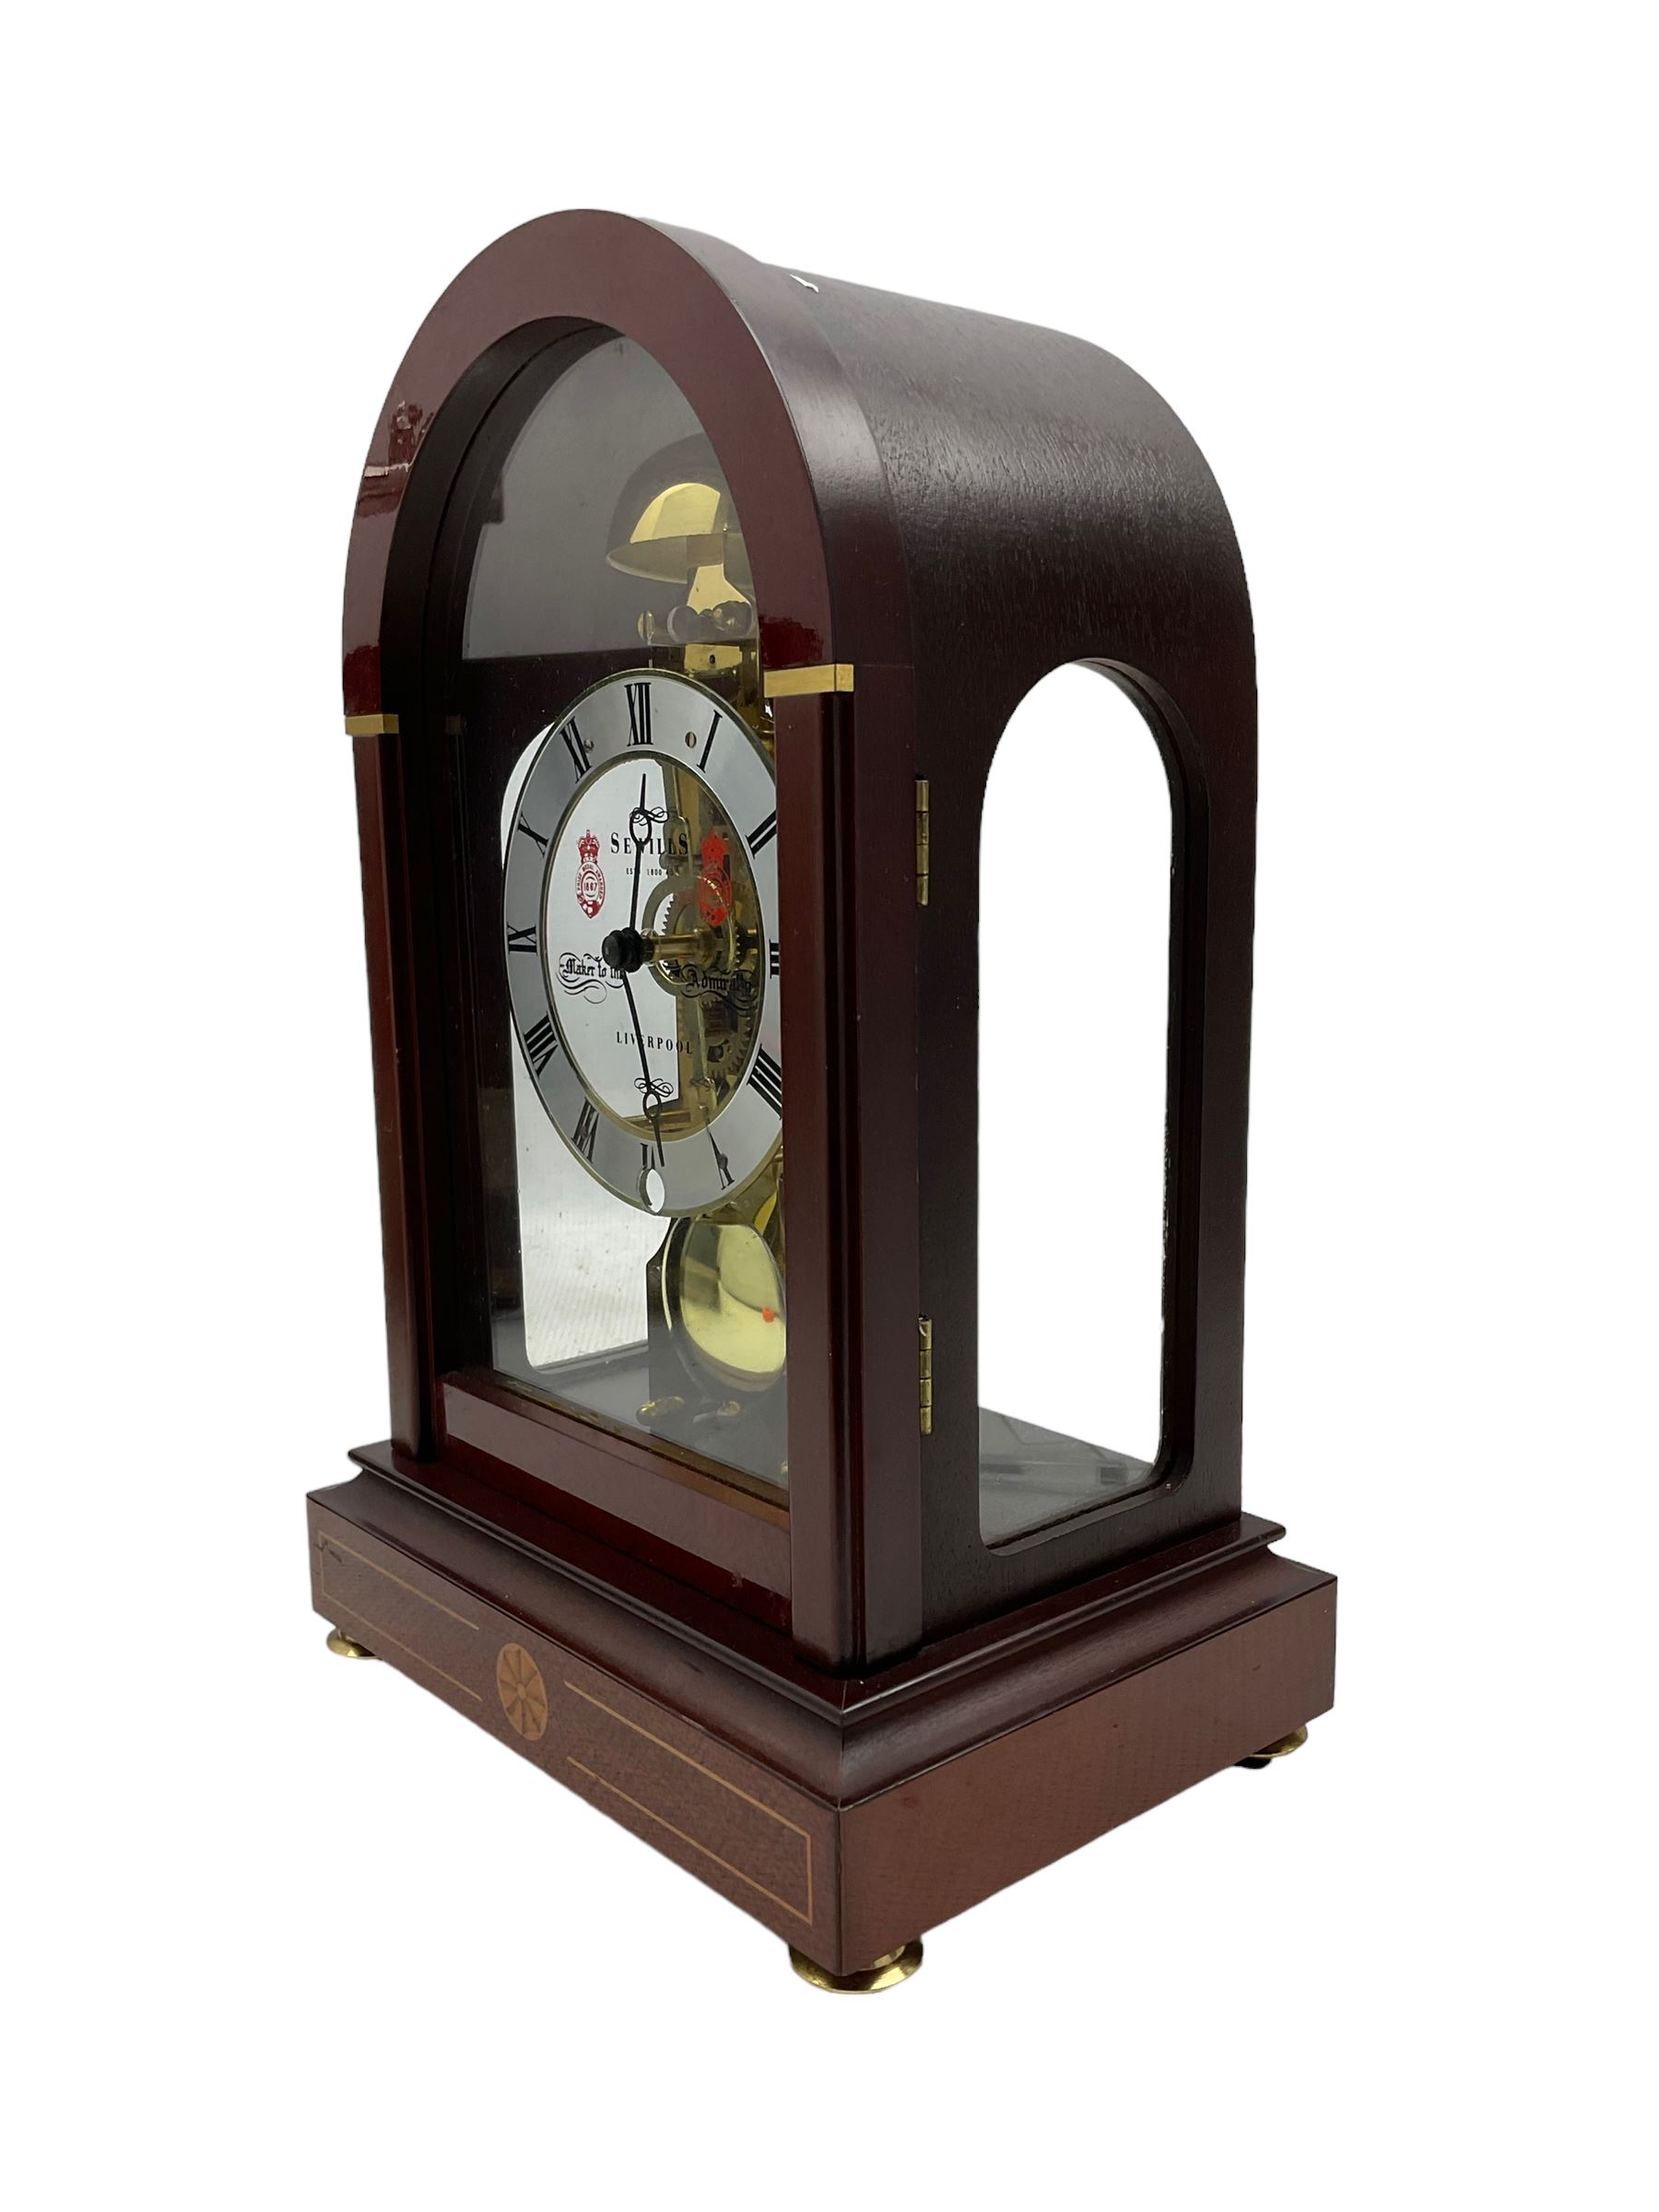 Sewells of Liverpool - 20th century 8-day skeleton clock in a four glass mahogany case - Image 2 of 4